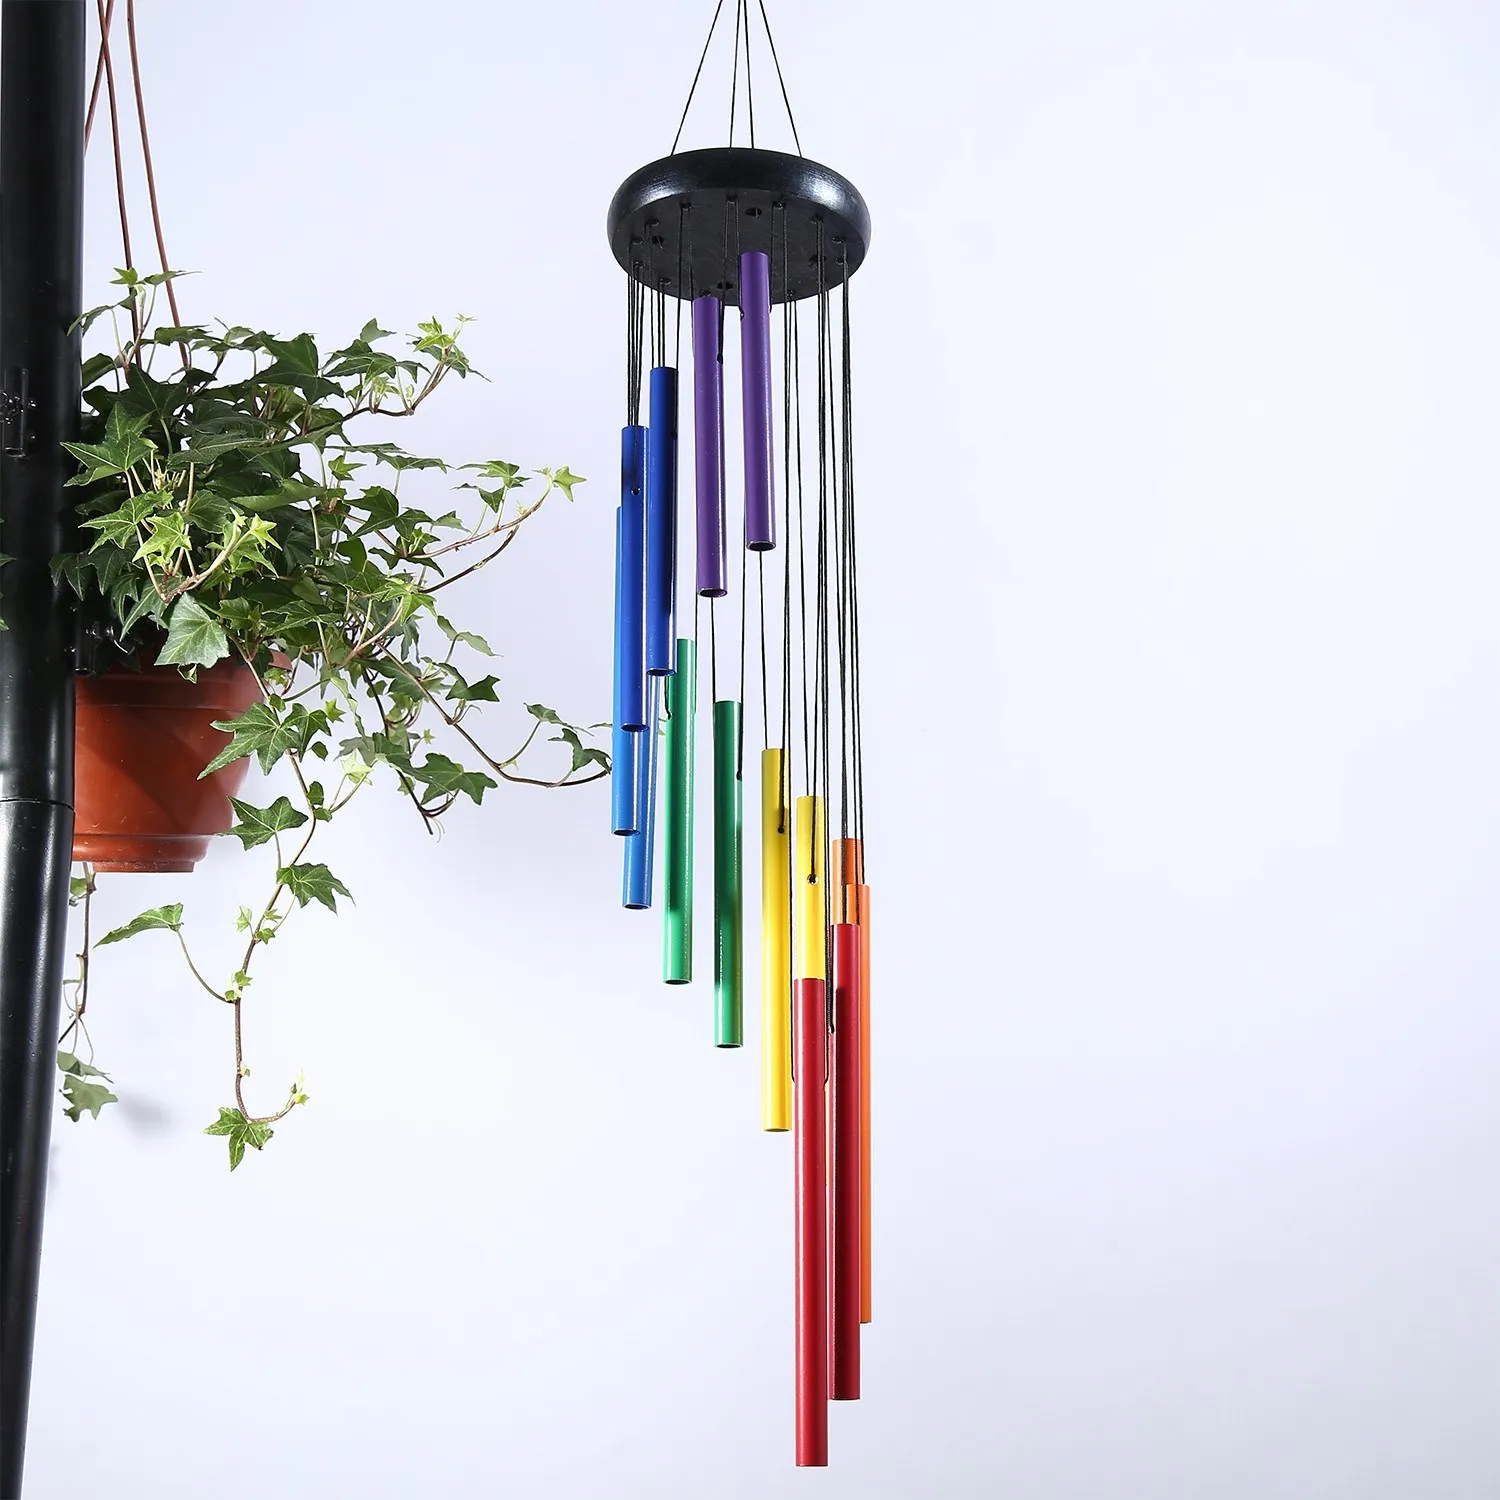 

Wind Chime Christmas Decoration Hanging Ornament Colorful Multi-Tube Wind Chimes Thanksgiving Day Home Festival Hanging Decor